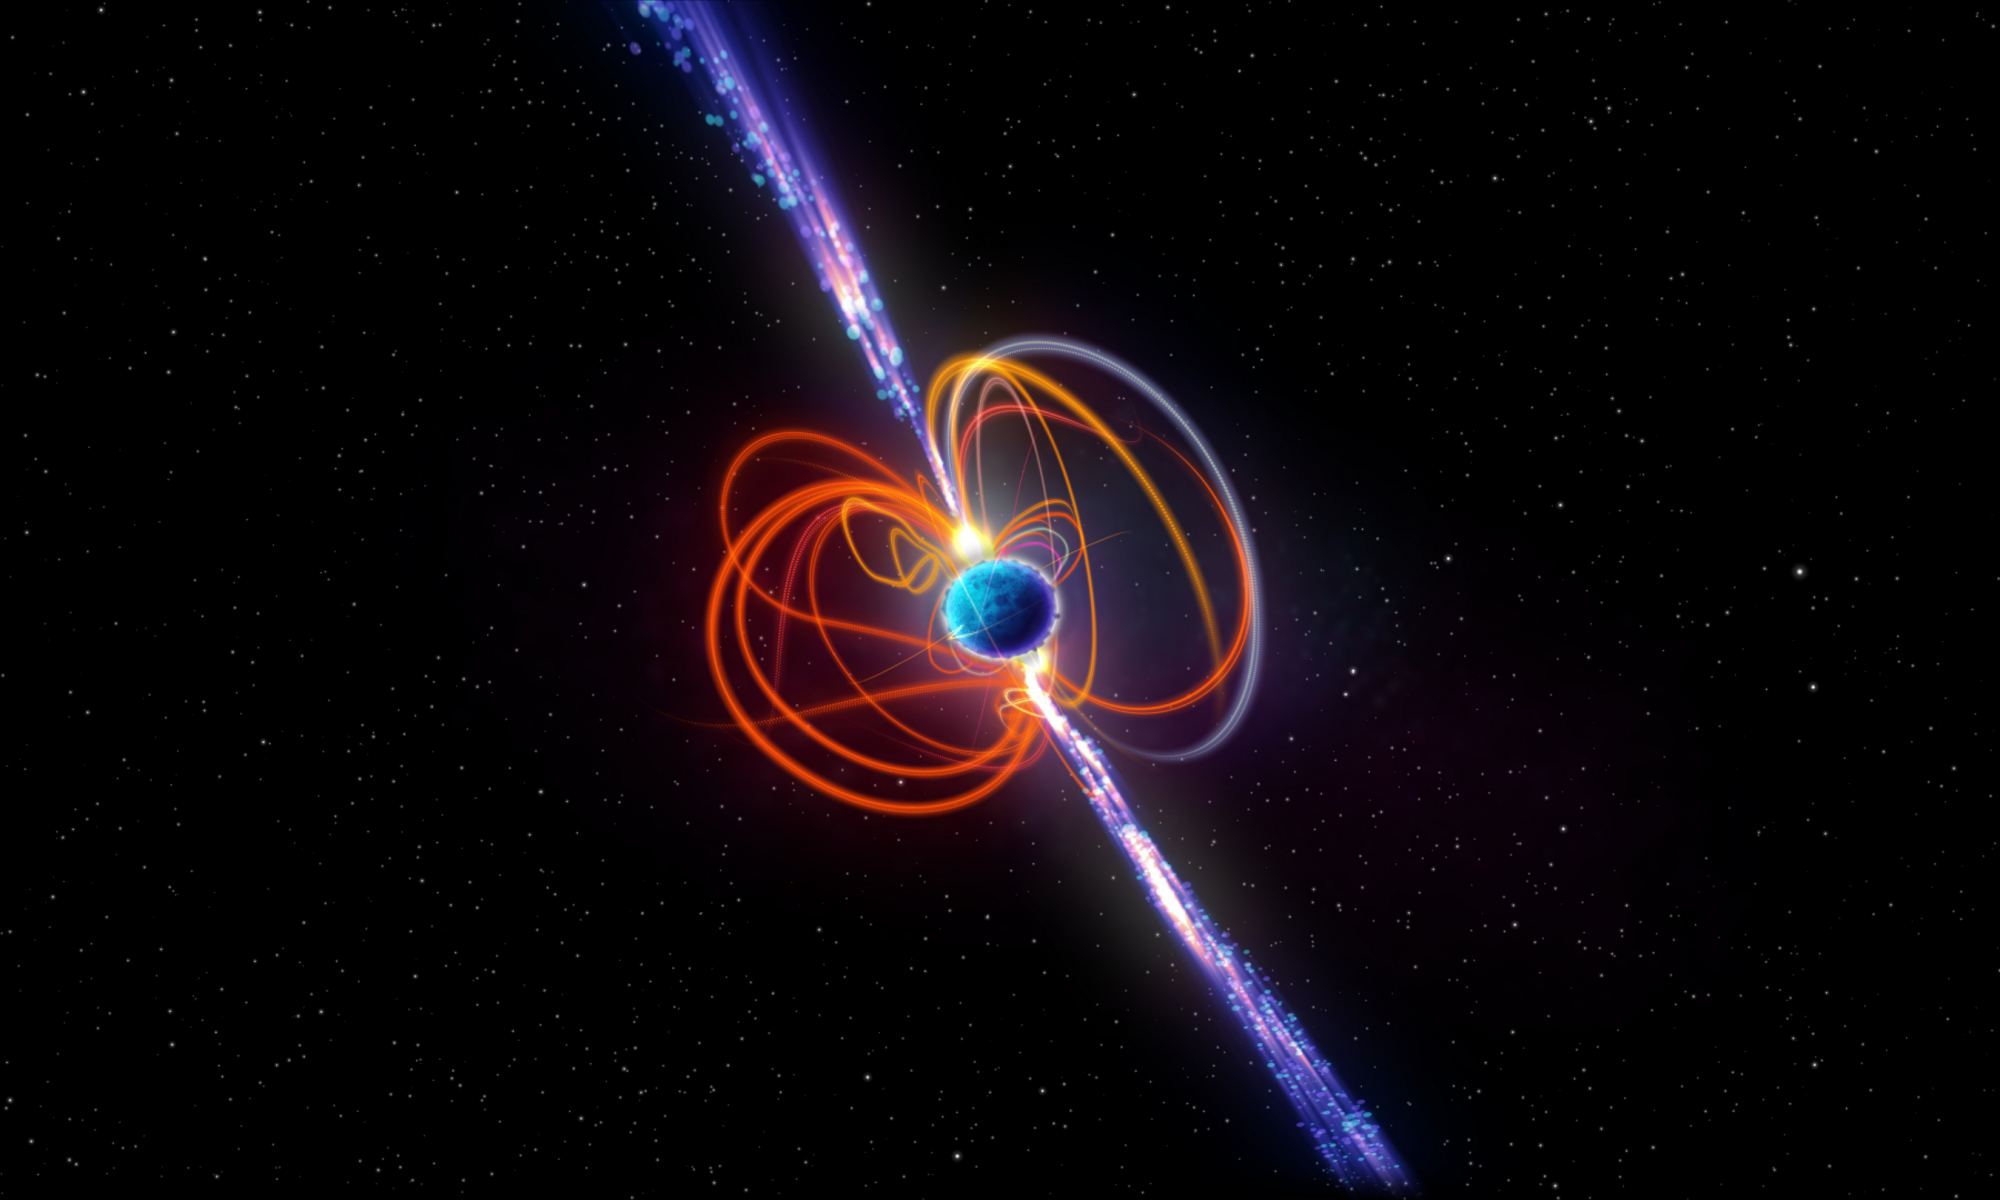 An artist’s impression of the ultra-long period magnetar—a rare type of star with extremely strong magnetic fields that can produce powerful bursts of energy. Credit: ICRAR